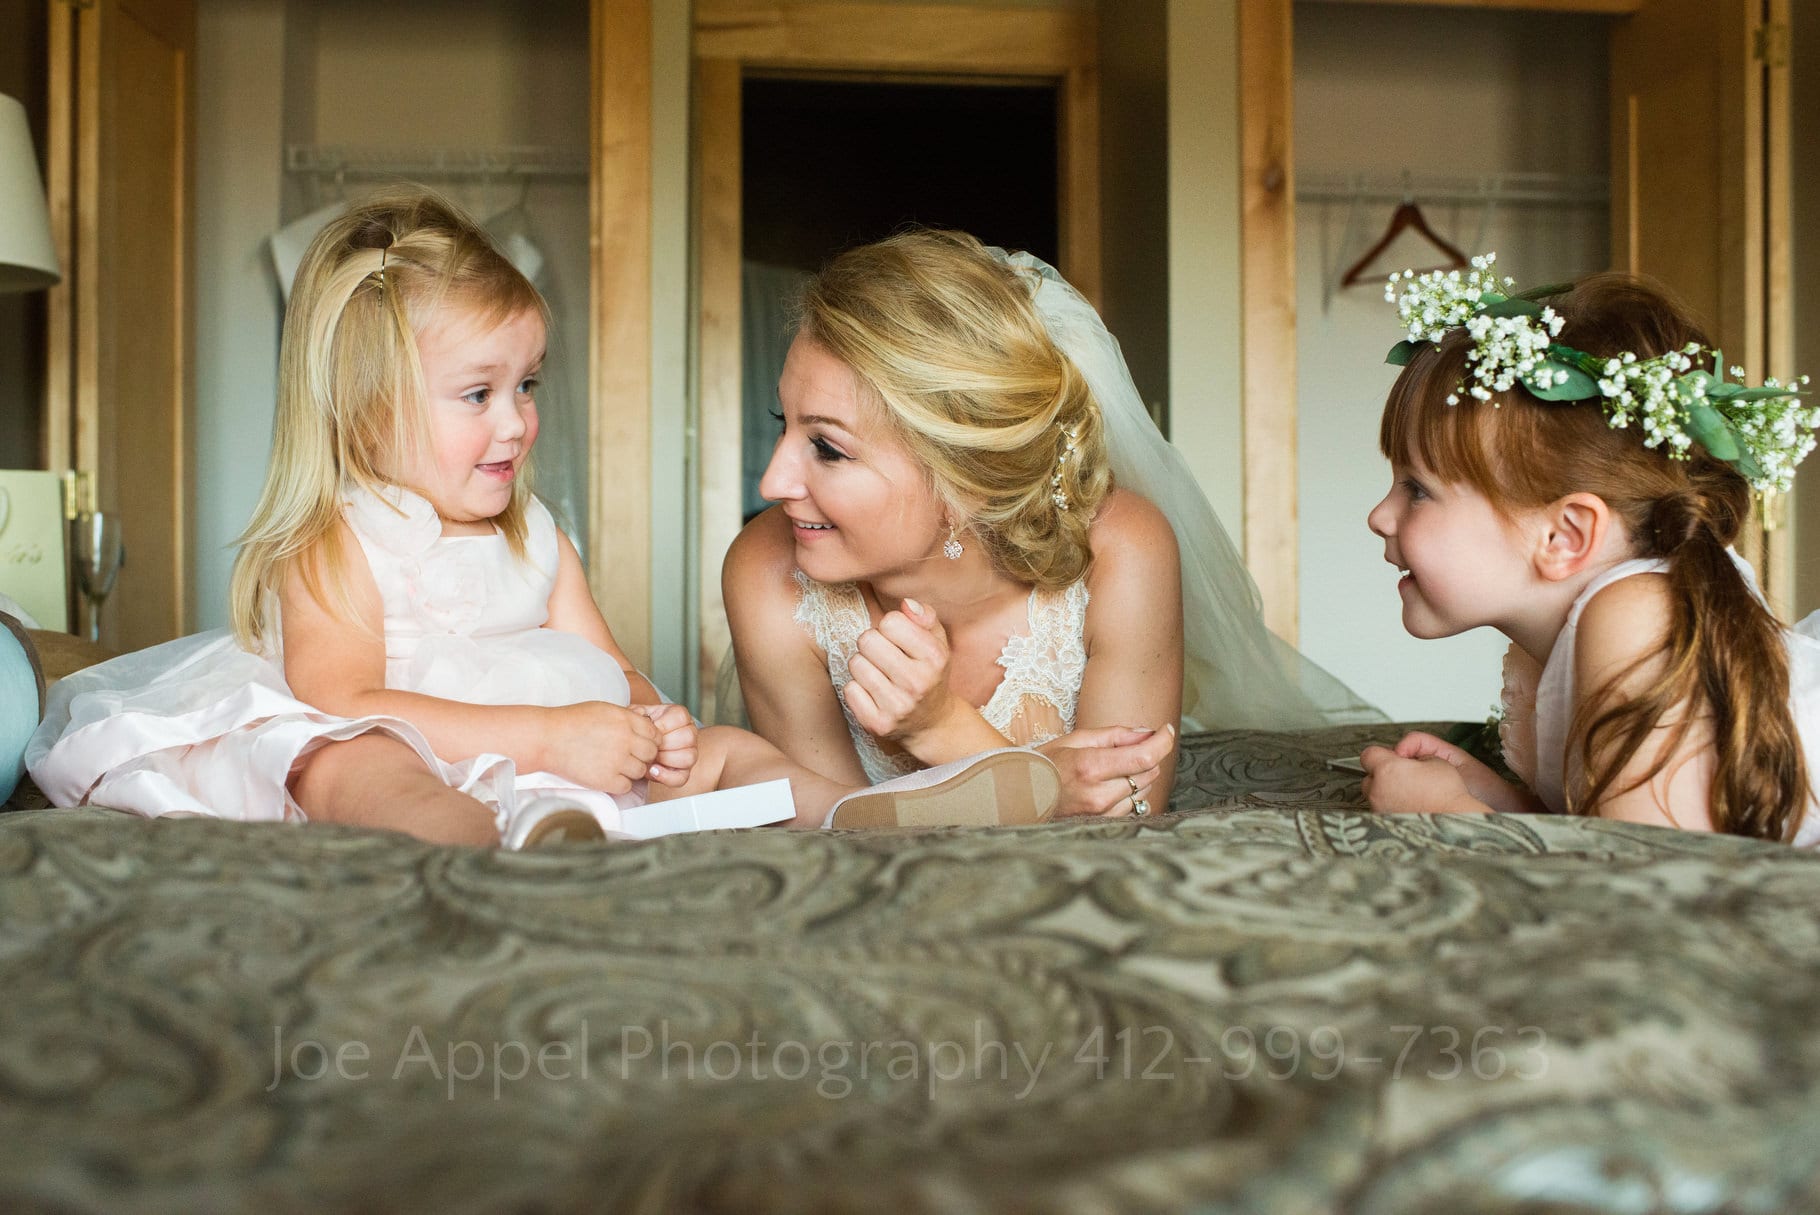 A bride lays on a bed between two little flower girls as they smile and talk.